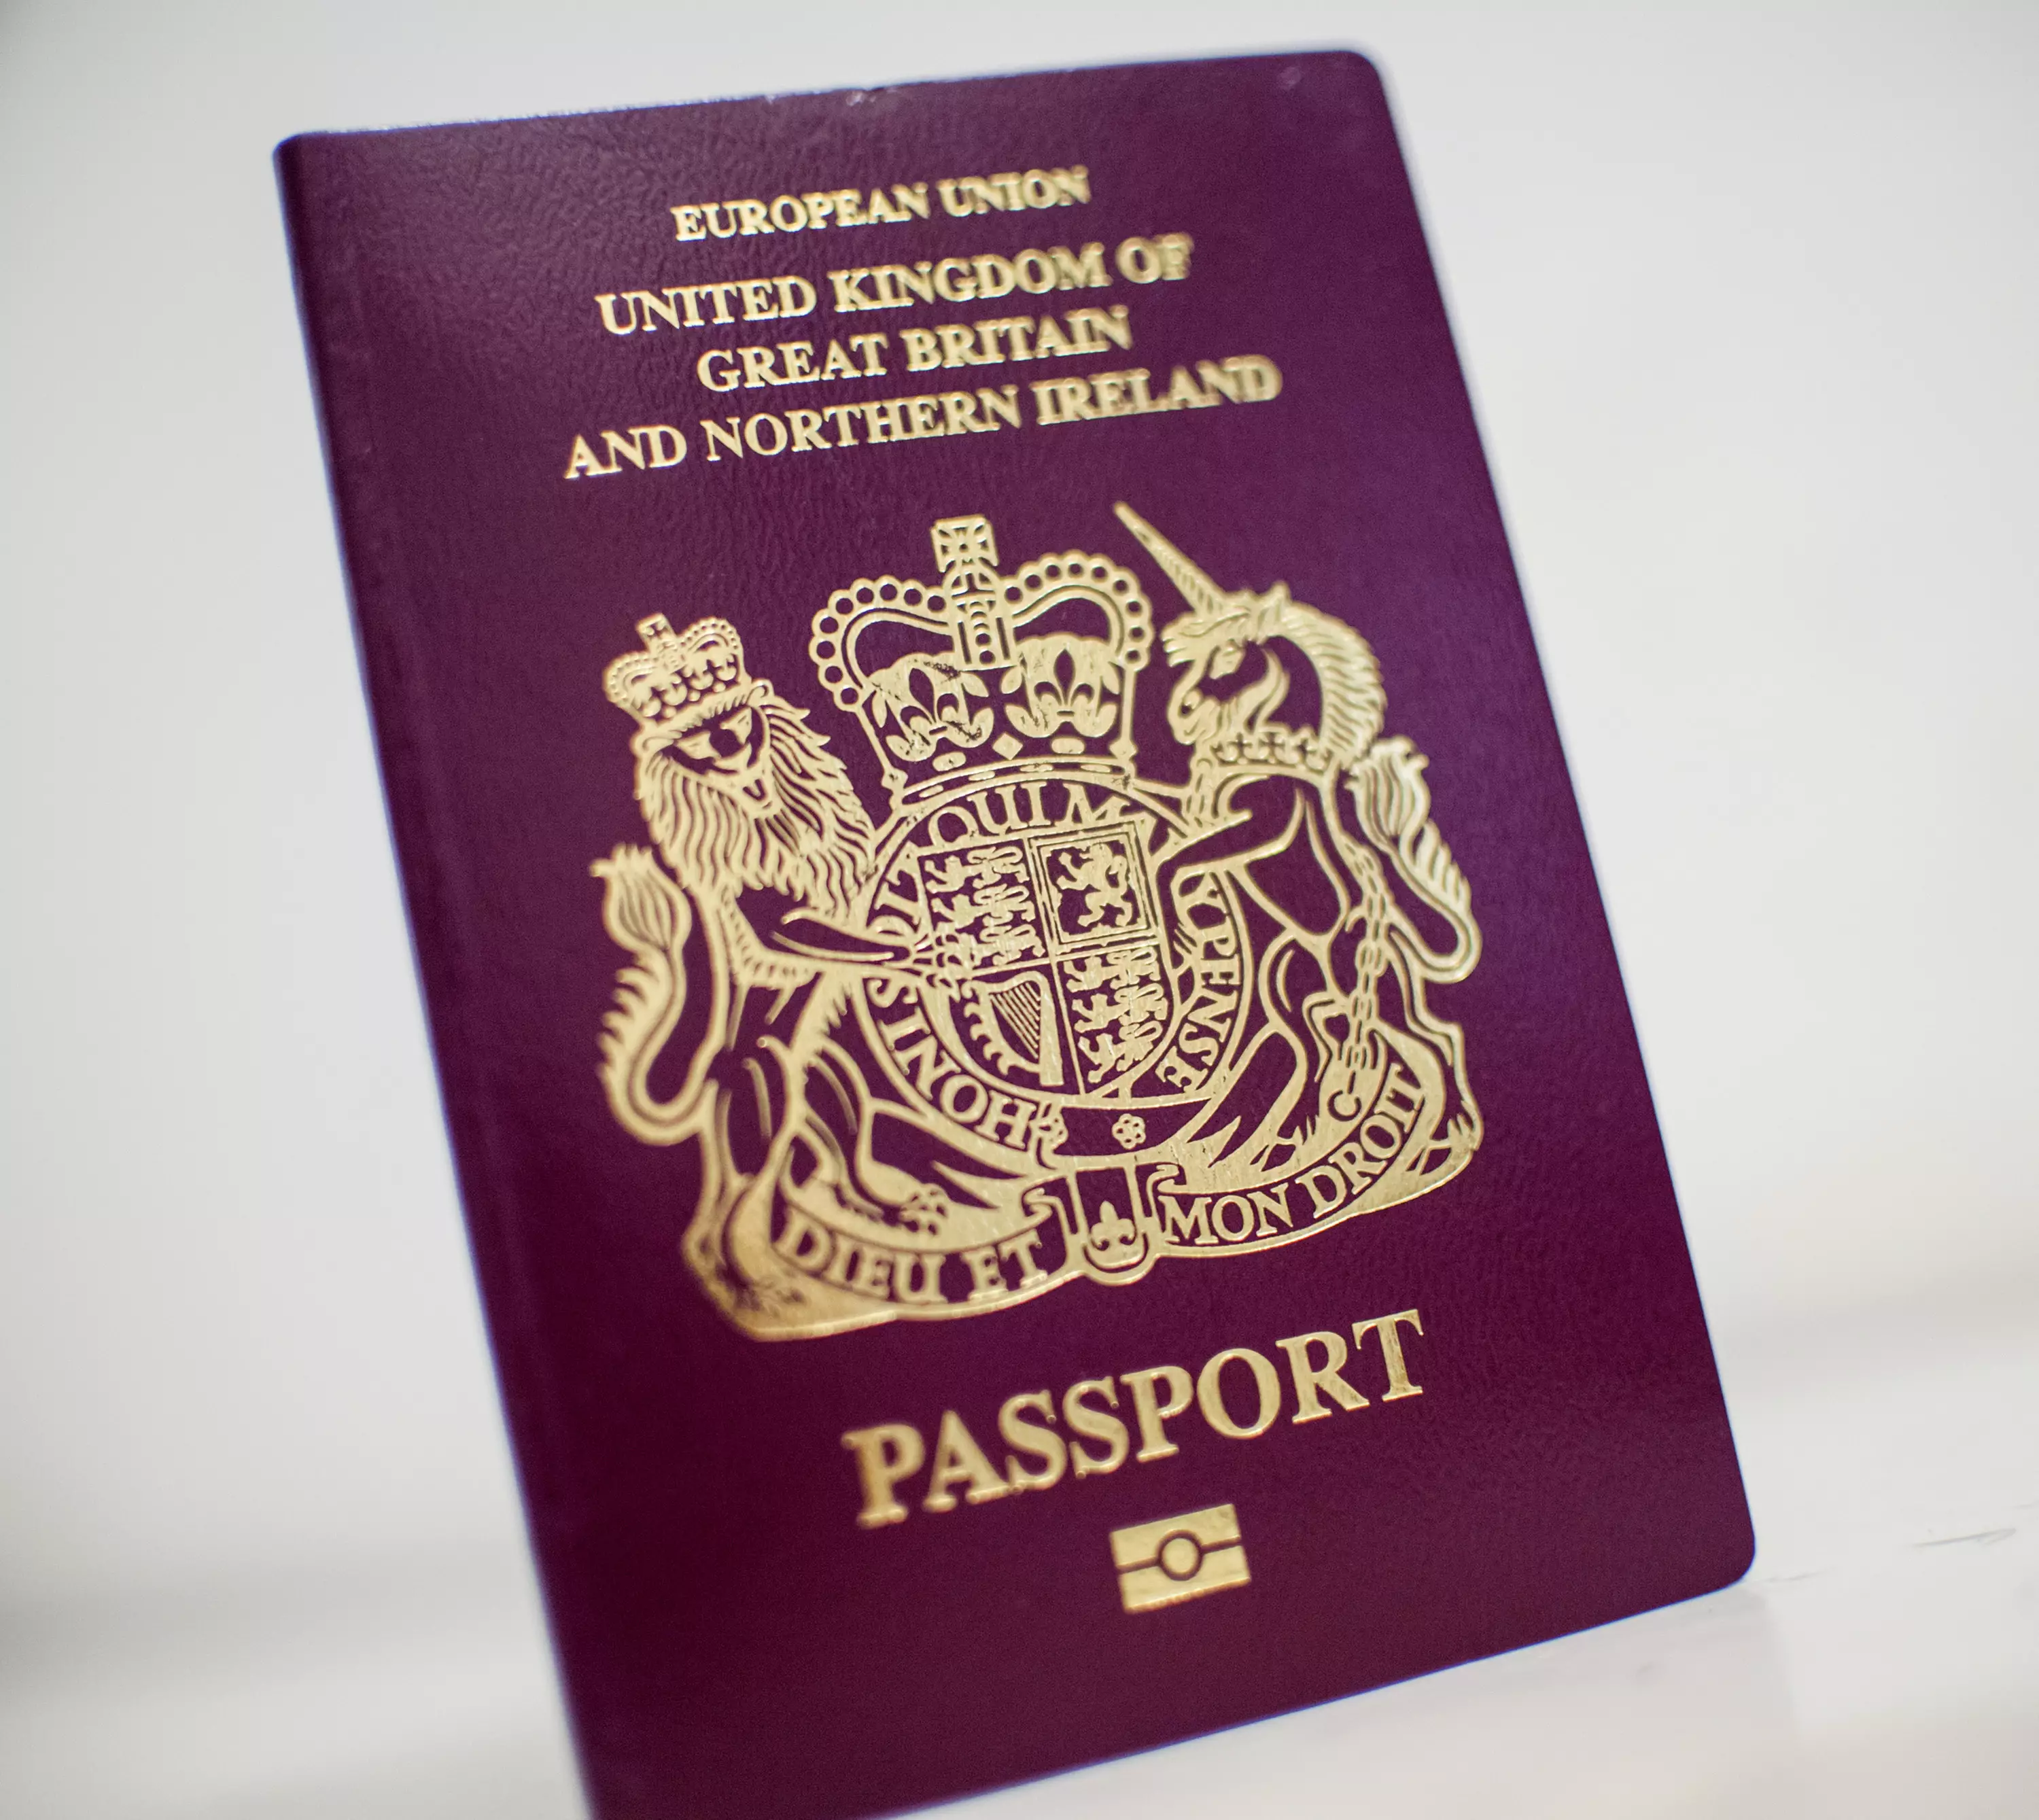 The British passport has dropped to sixth place this year.